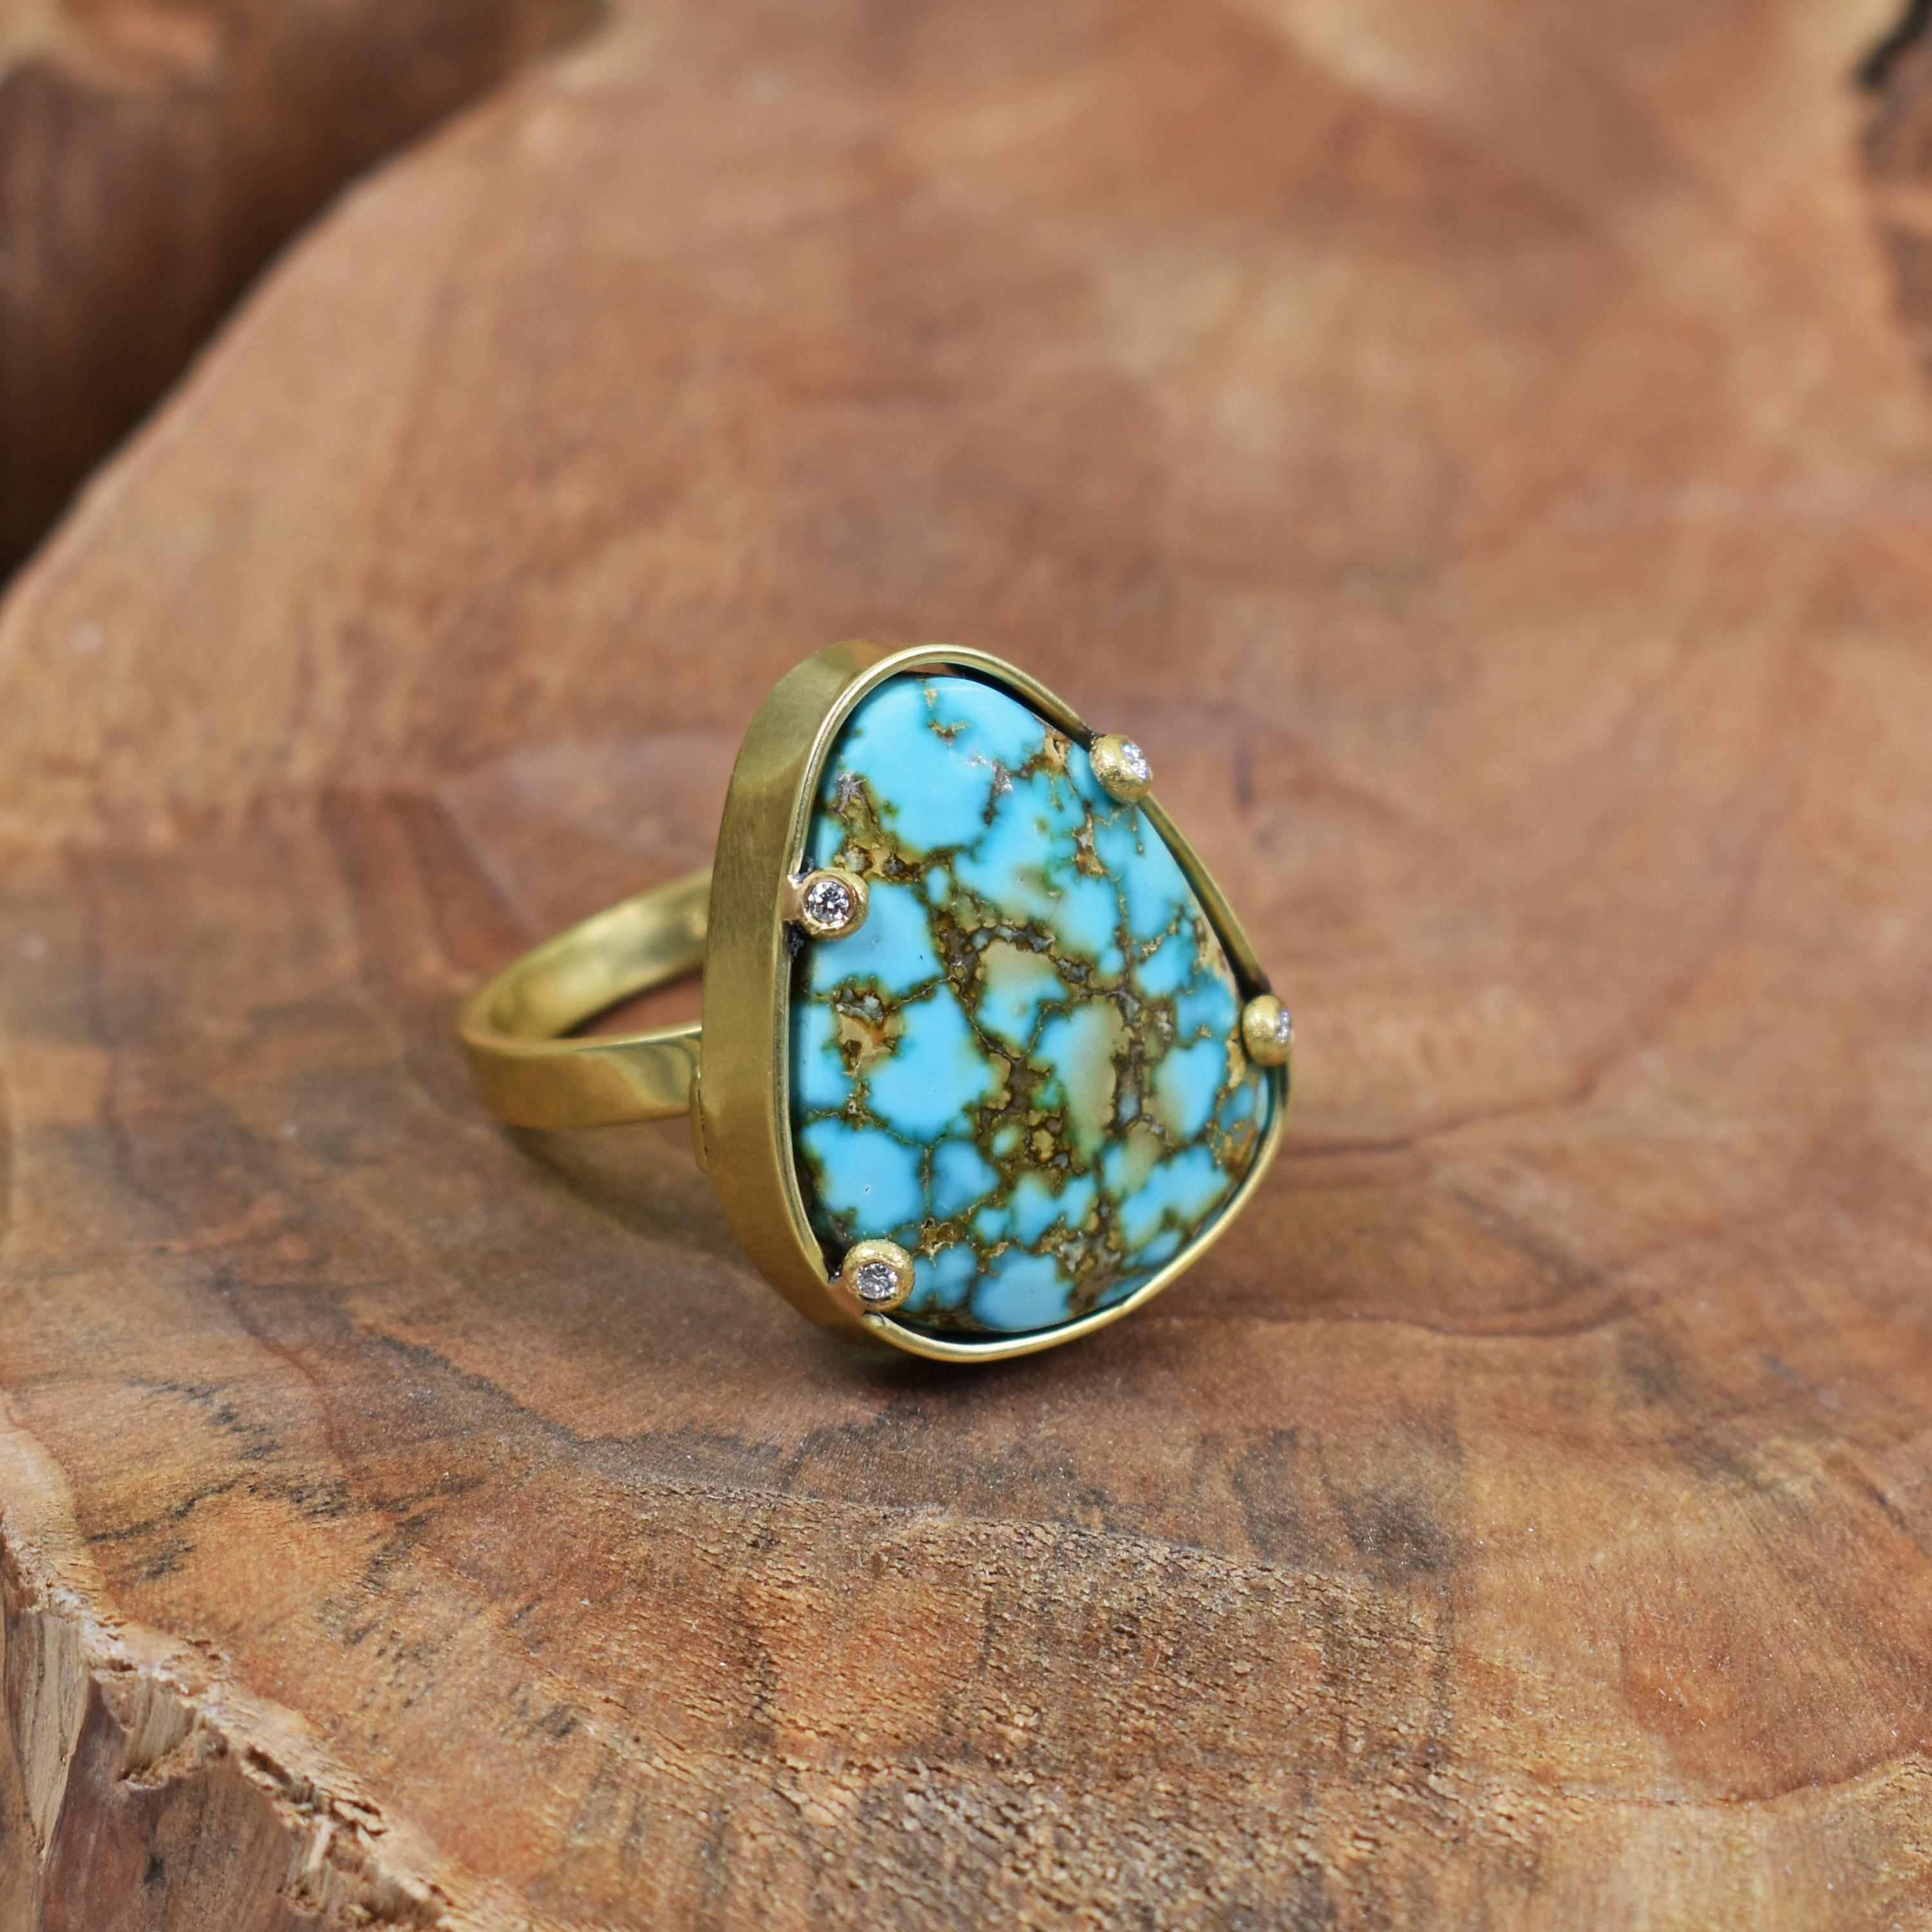 15.5 carat Turquoise Mountain (Arizona) Turquoise and accent white diamonds in a brushed, satin 18k yellow gold cocktail ring. Ring is size 6.25 and is resizable. Stunning Turquoise gemstone with golden matrix in a contemporary, artisan ring.